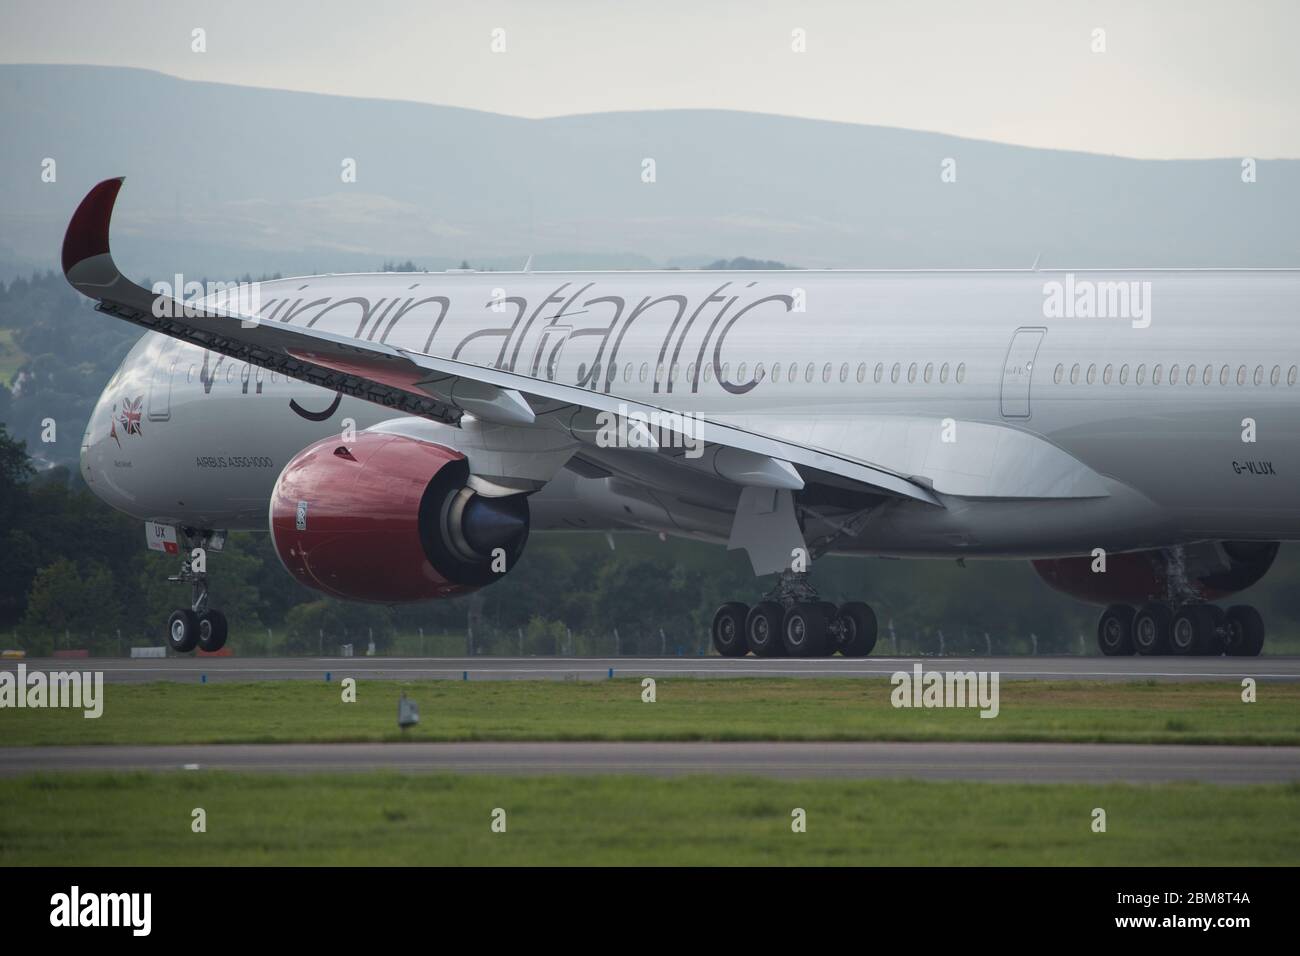 Glasgow, UK. 25 August 2019. Virgin Atlantic Airbus A350-1000 aircraft seen at Glasgow International Airport for pilot training. Virgin's brand new jumbo jet boasts an amazing new 'loft' social space with sofas in business class, and aptly adorned by the registration G-VLUX. The entire aircraft will also have access to high-speed Wi-Fi. Virgin Atlantic has ordered a total of 12 Airbus A350-1000s. They are all scheduled to join the fleet by 2021 in an order worth an estimated $4.4 billion (£3.36 billion). Credit: Colin Fisher/Alamy Live News. Stock Photo